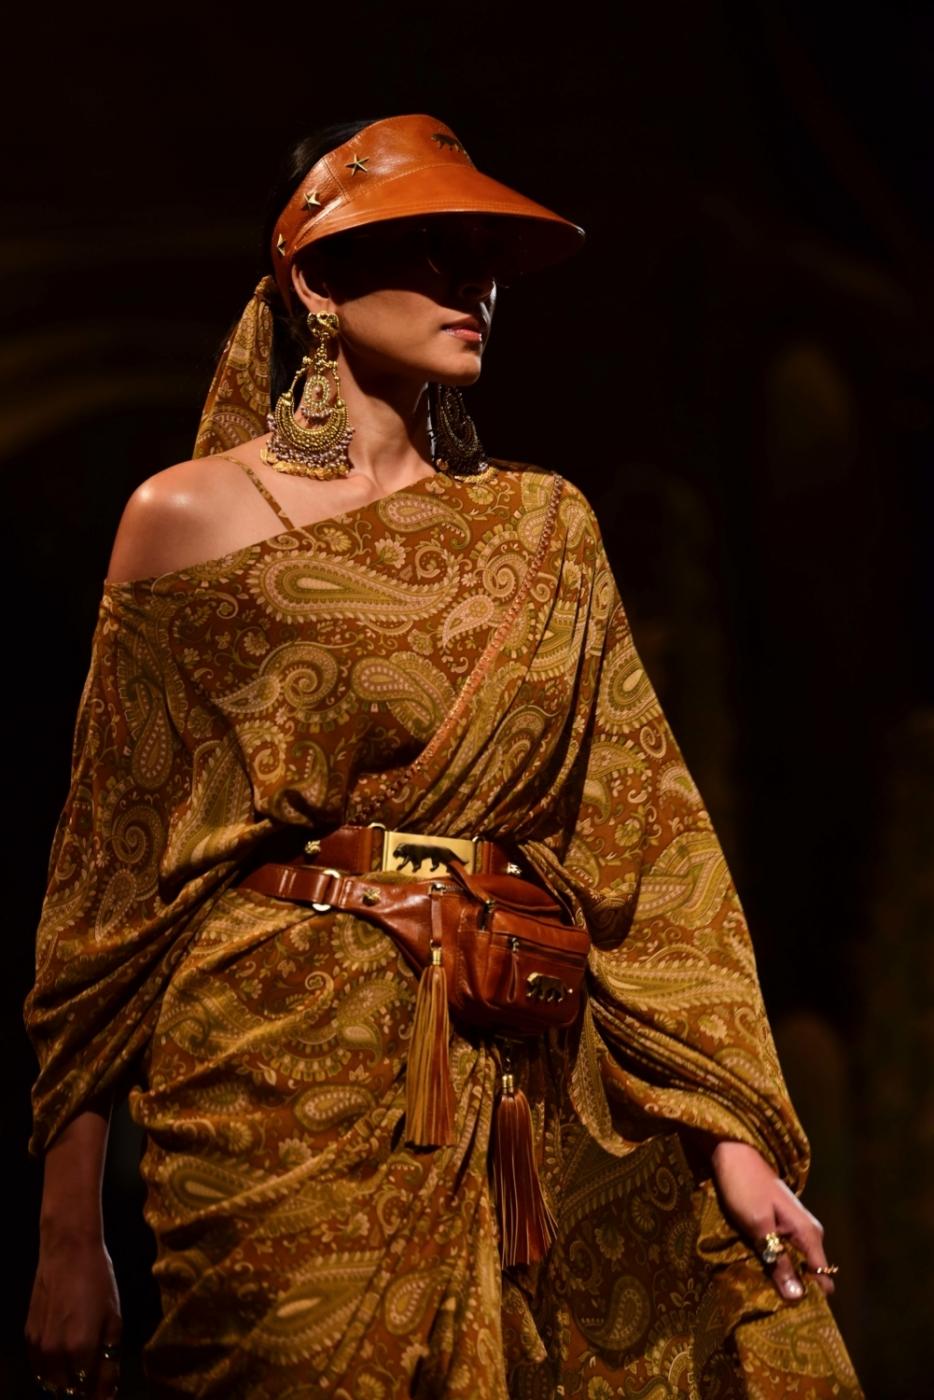 New Delhi: A model showcases "Kashgaar Bazaar" collection, a creation by fashion designer Sabyasachi Mukherjee on the 20th year celebrations of his brand "Sabyasachi", in New Delhi, on April 6, 2019. (Photo: IANS) by .